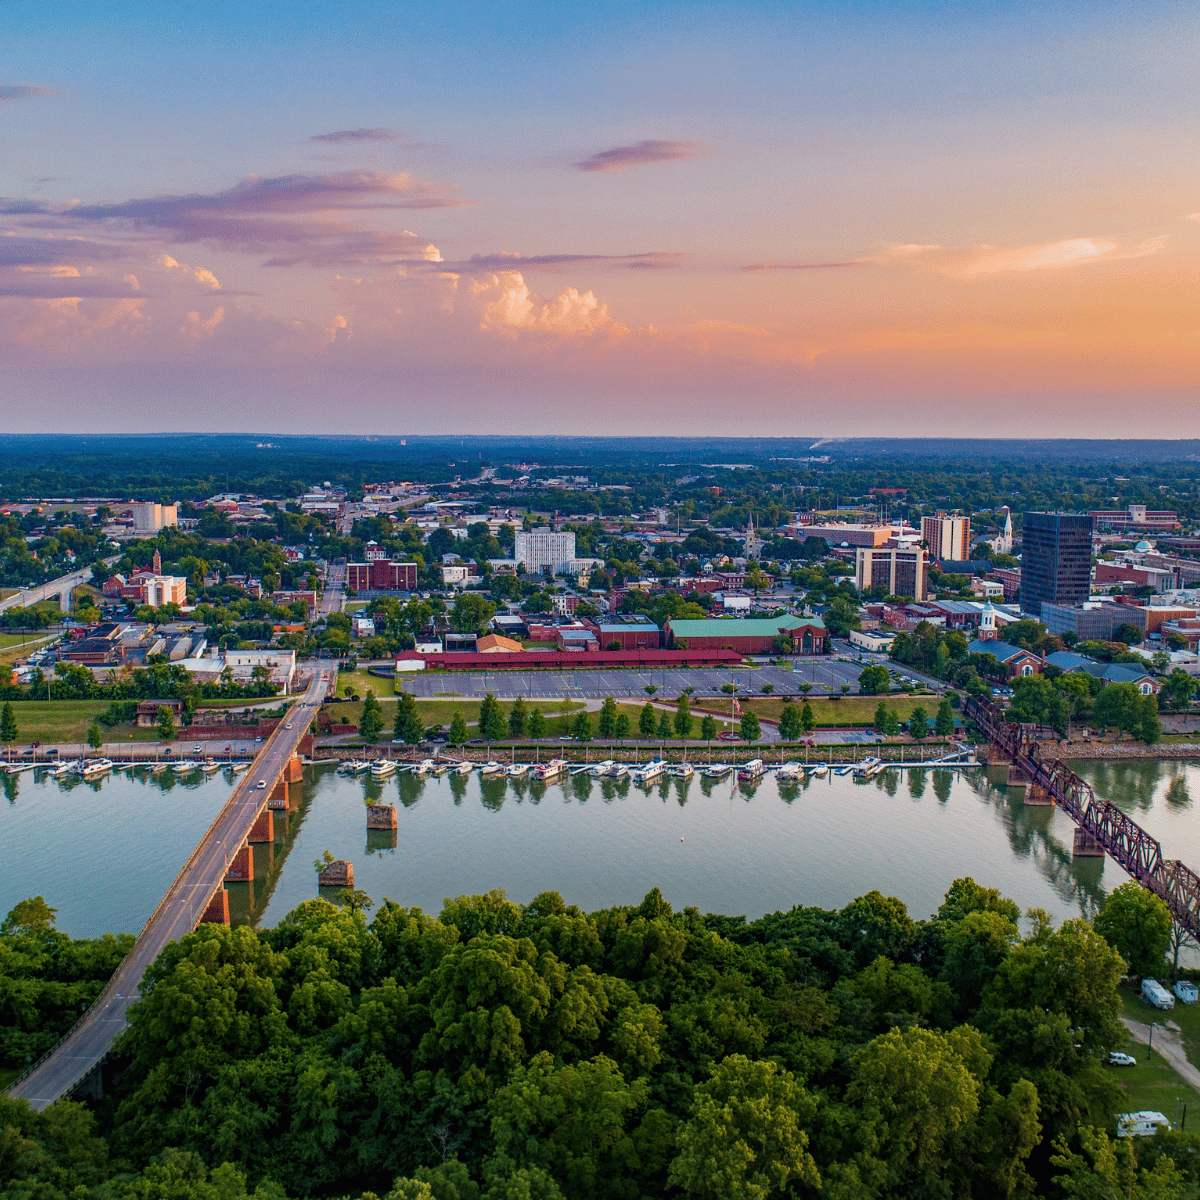 Aerial view of a city with a bridge over a lake surrounded by trees.